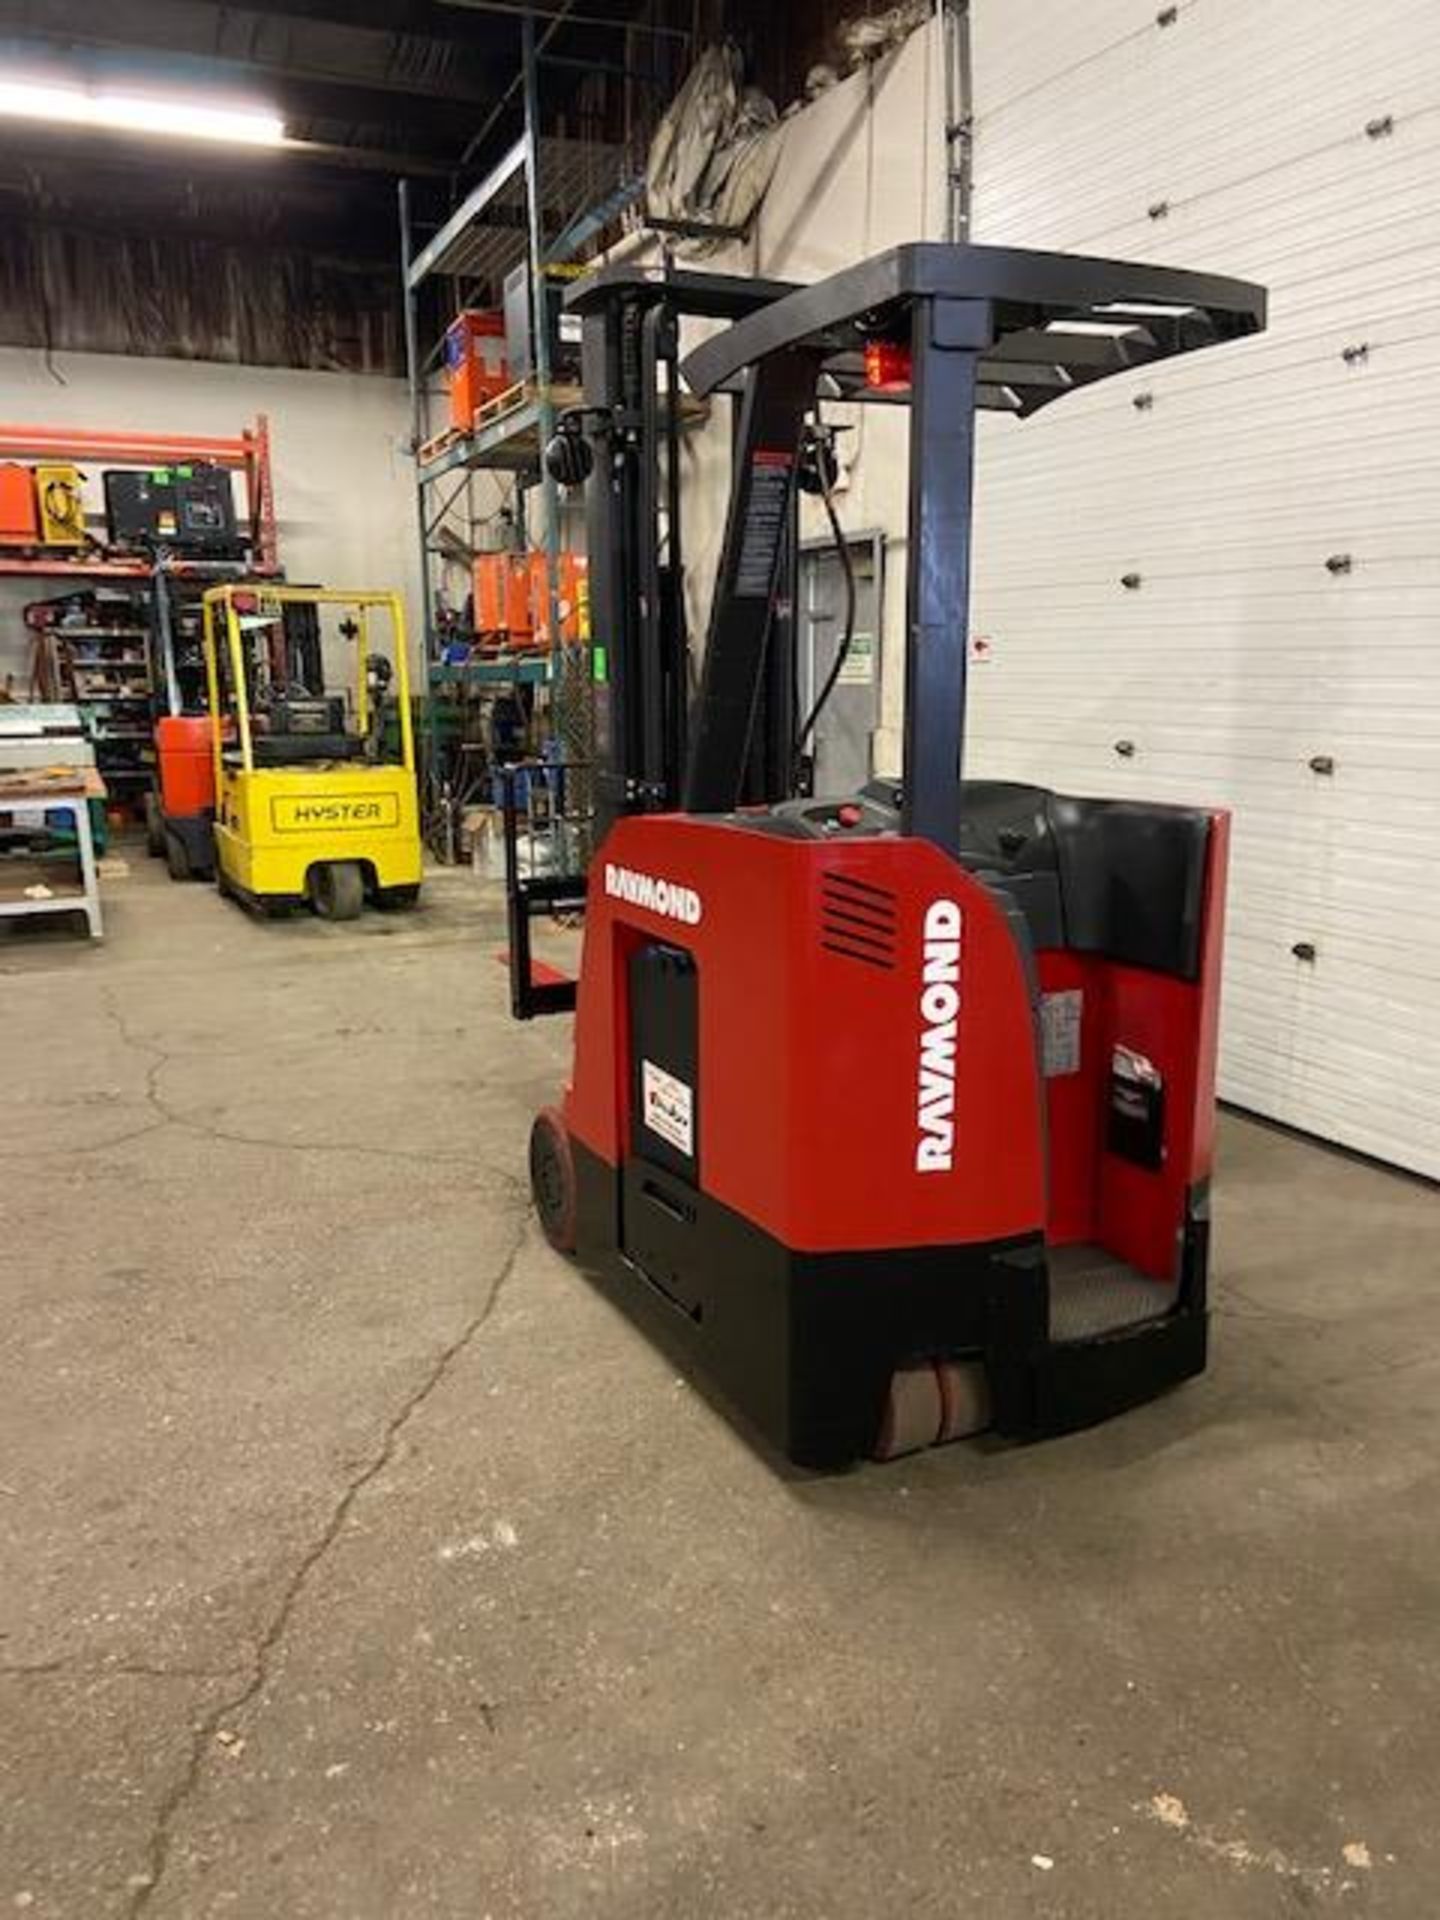 FREE CUSTOMS - 2012 Raymond 3500lbs Capacity Stand On Forklift Electric with 3-STAGE MAST sideshift - Image 3 of 3